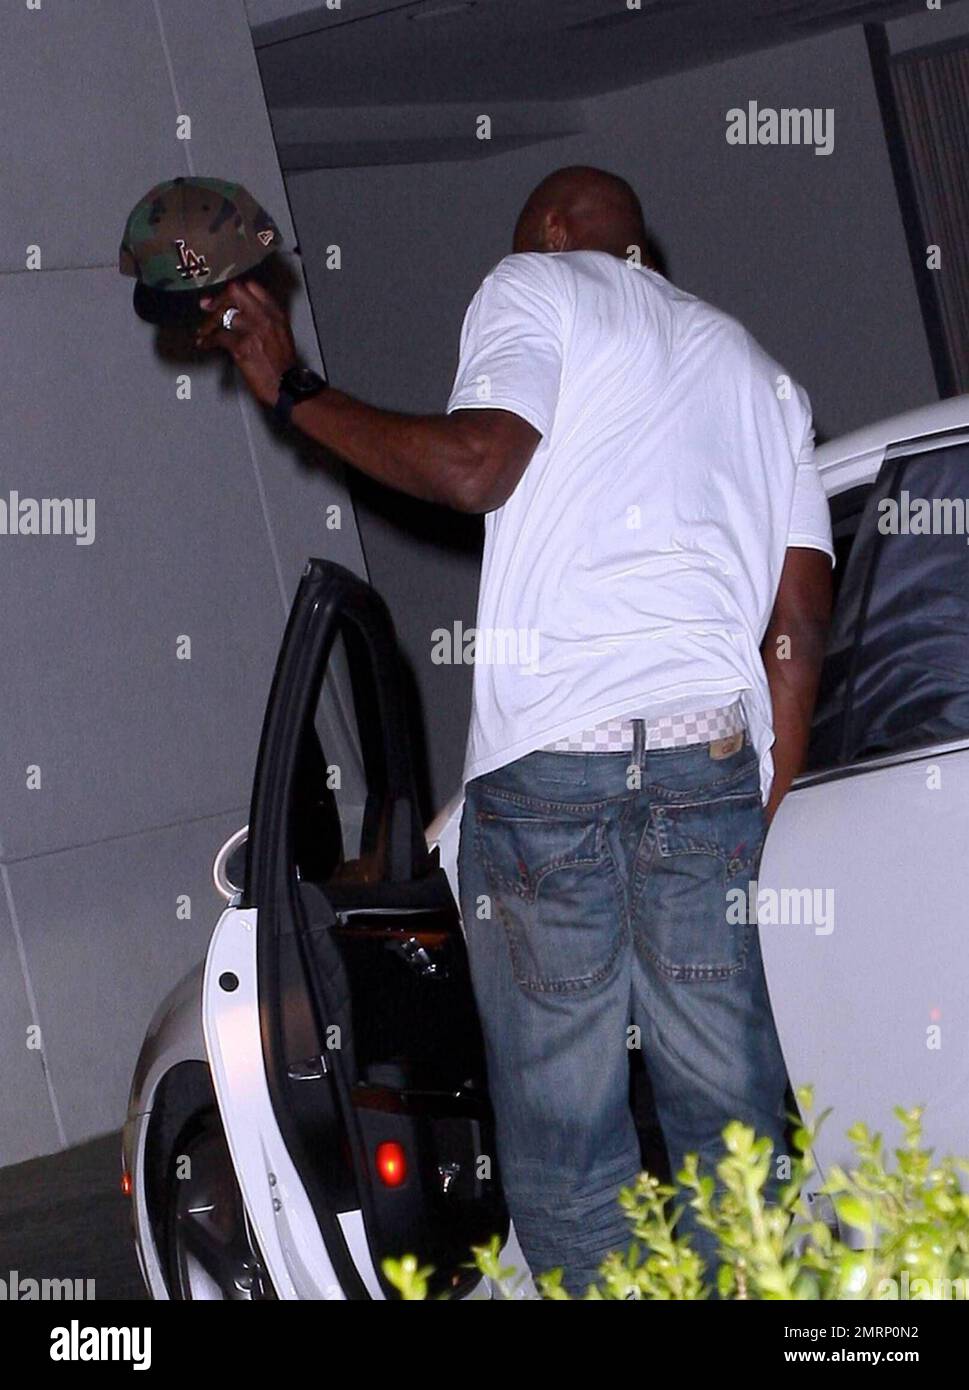 EXCLUSIVE!! Khloe Kardashian's new husband, LA Lakers player Lamar Odom, is alone as he leaves the hotel where the couple spent their first night together as husband and wife earlier this week. Odom, carrying a bottle of perfume or cologne and wearing jeans, a t shirt and sneakers, waves his hat as he gets in his car to leave. Los Angeles, CA. 10/2/09. Stock Photo